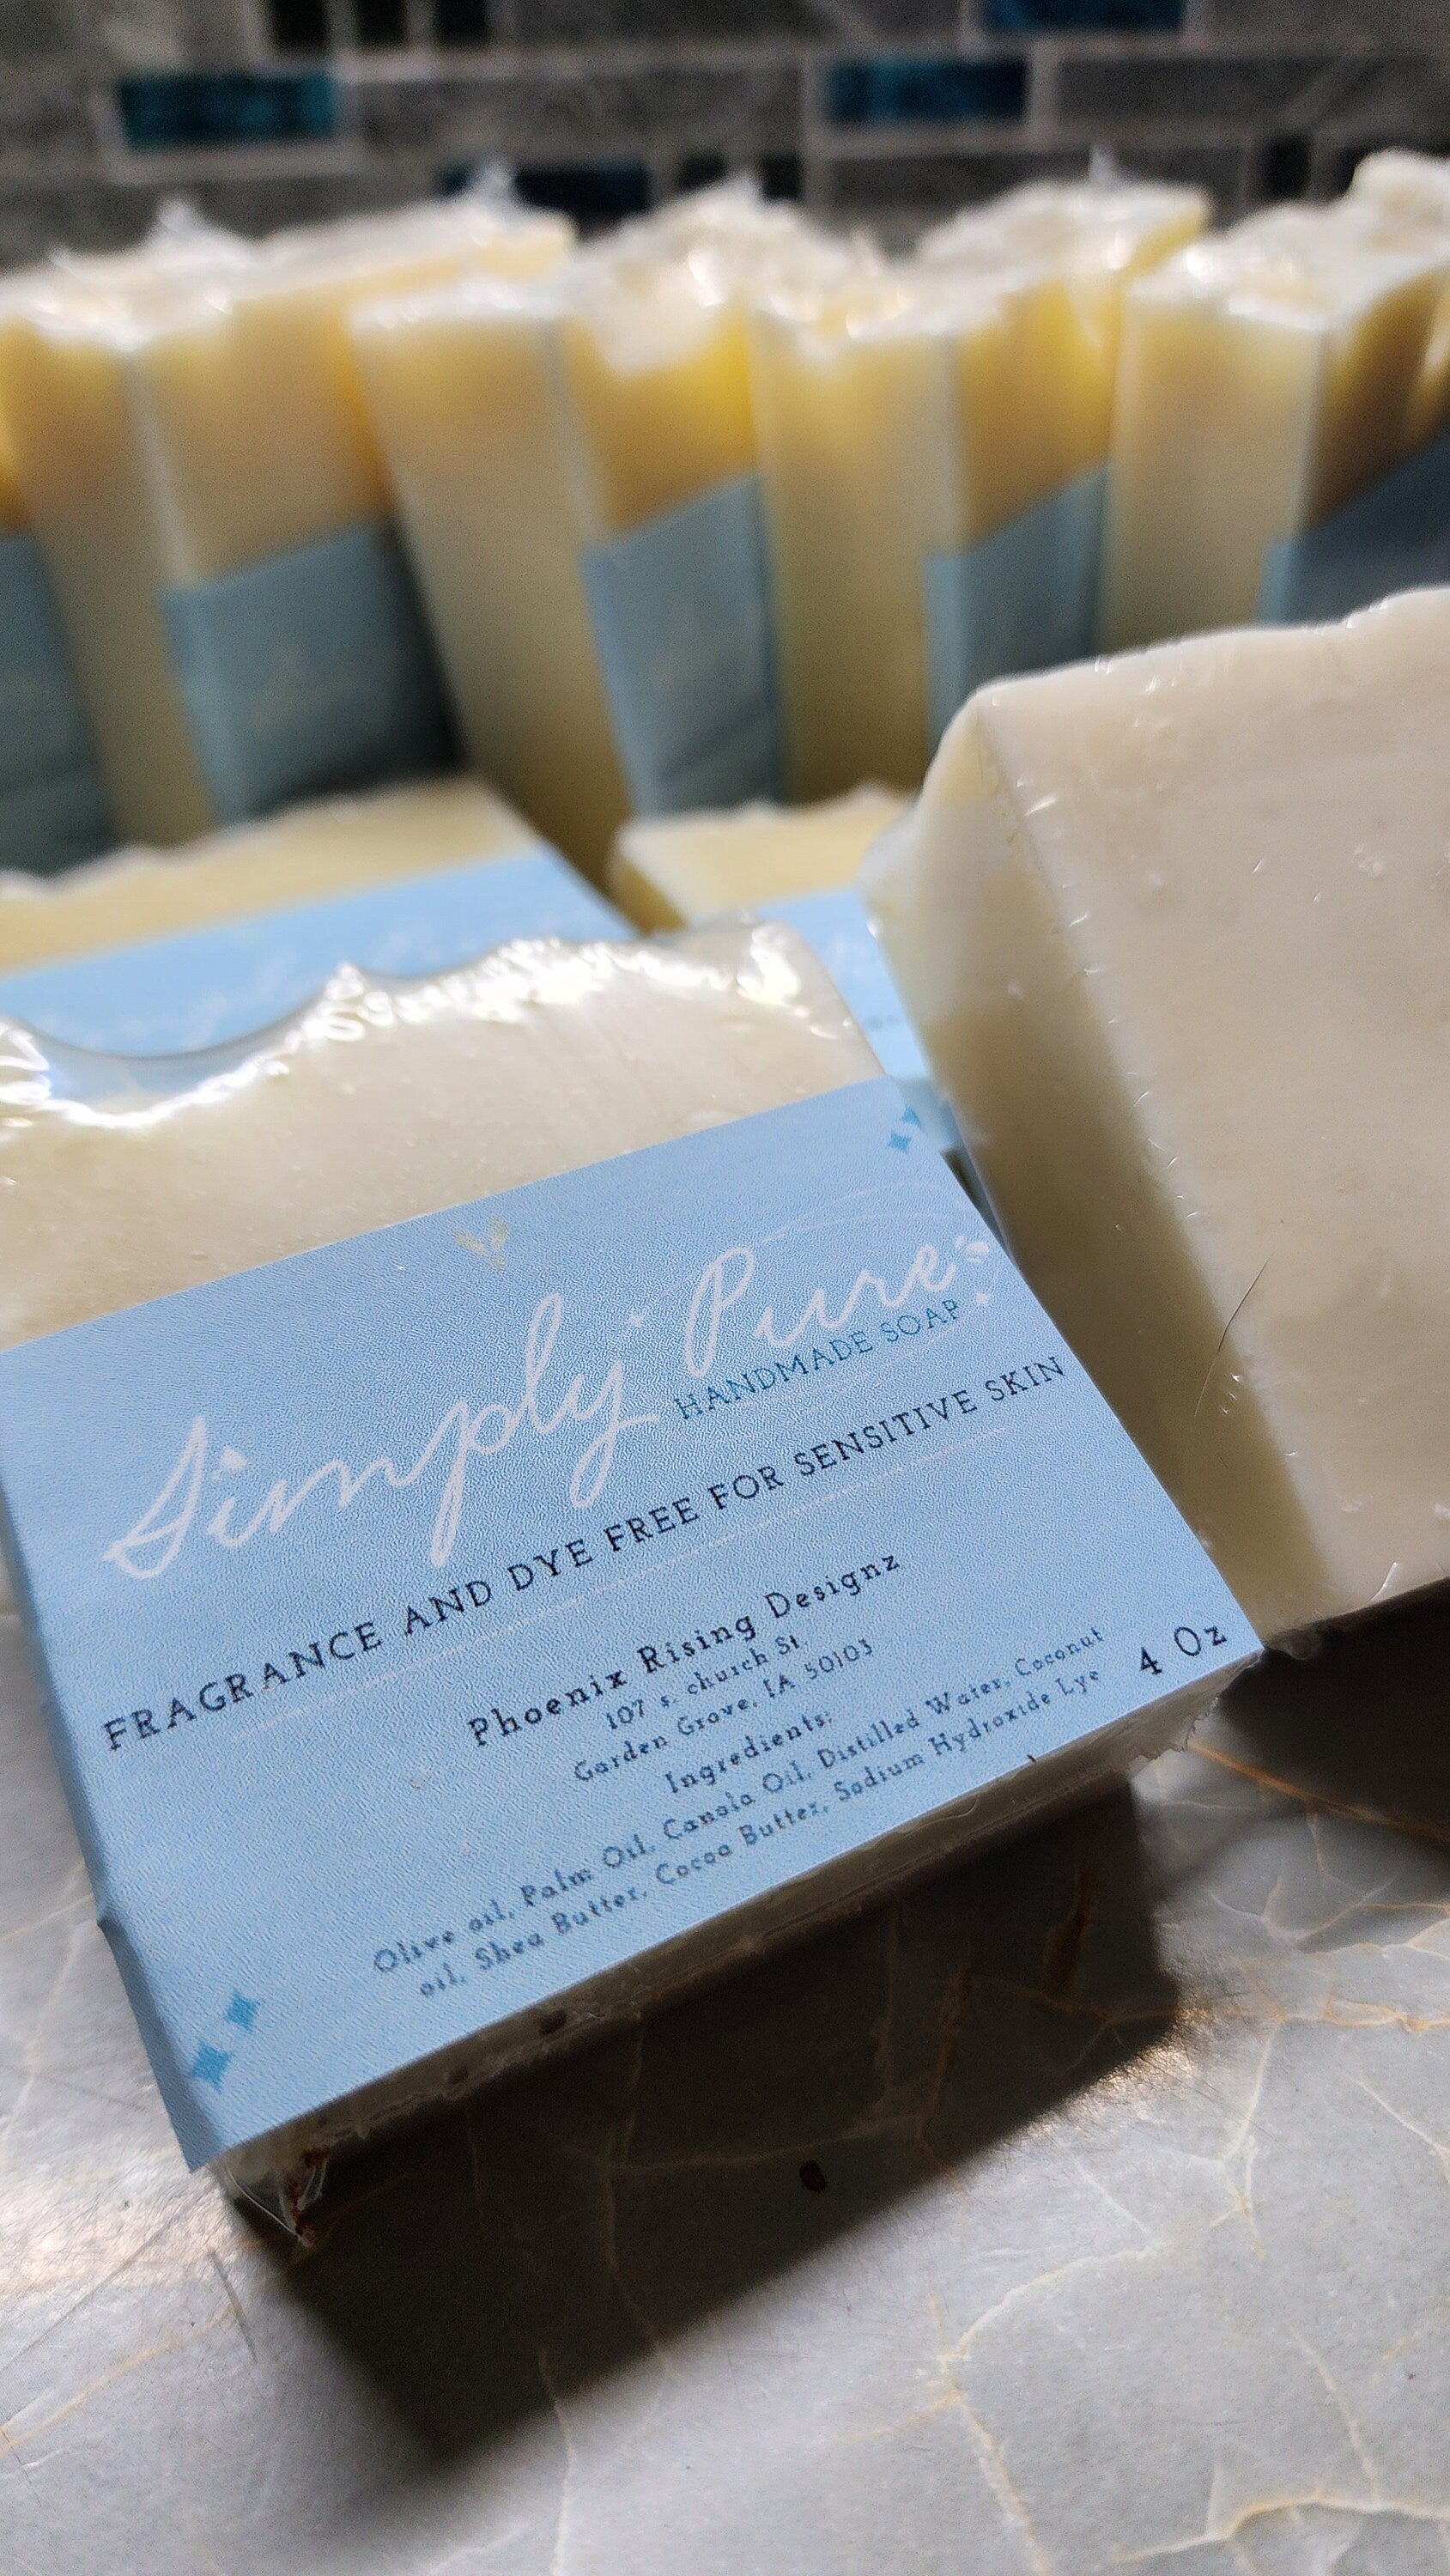 Simply Pure Fragrance and Dye Free Soap